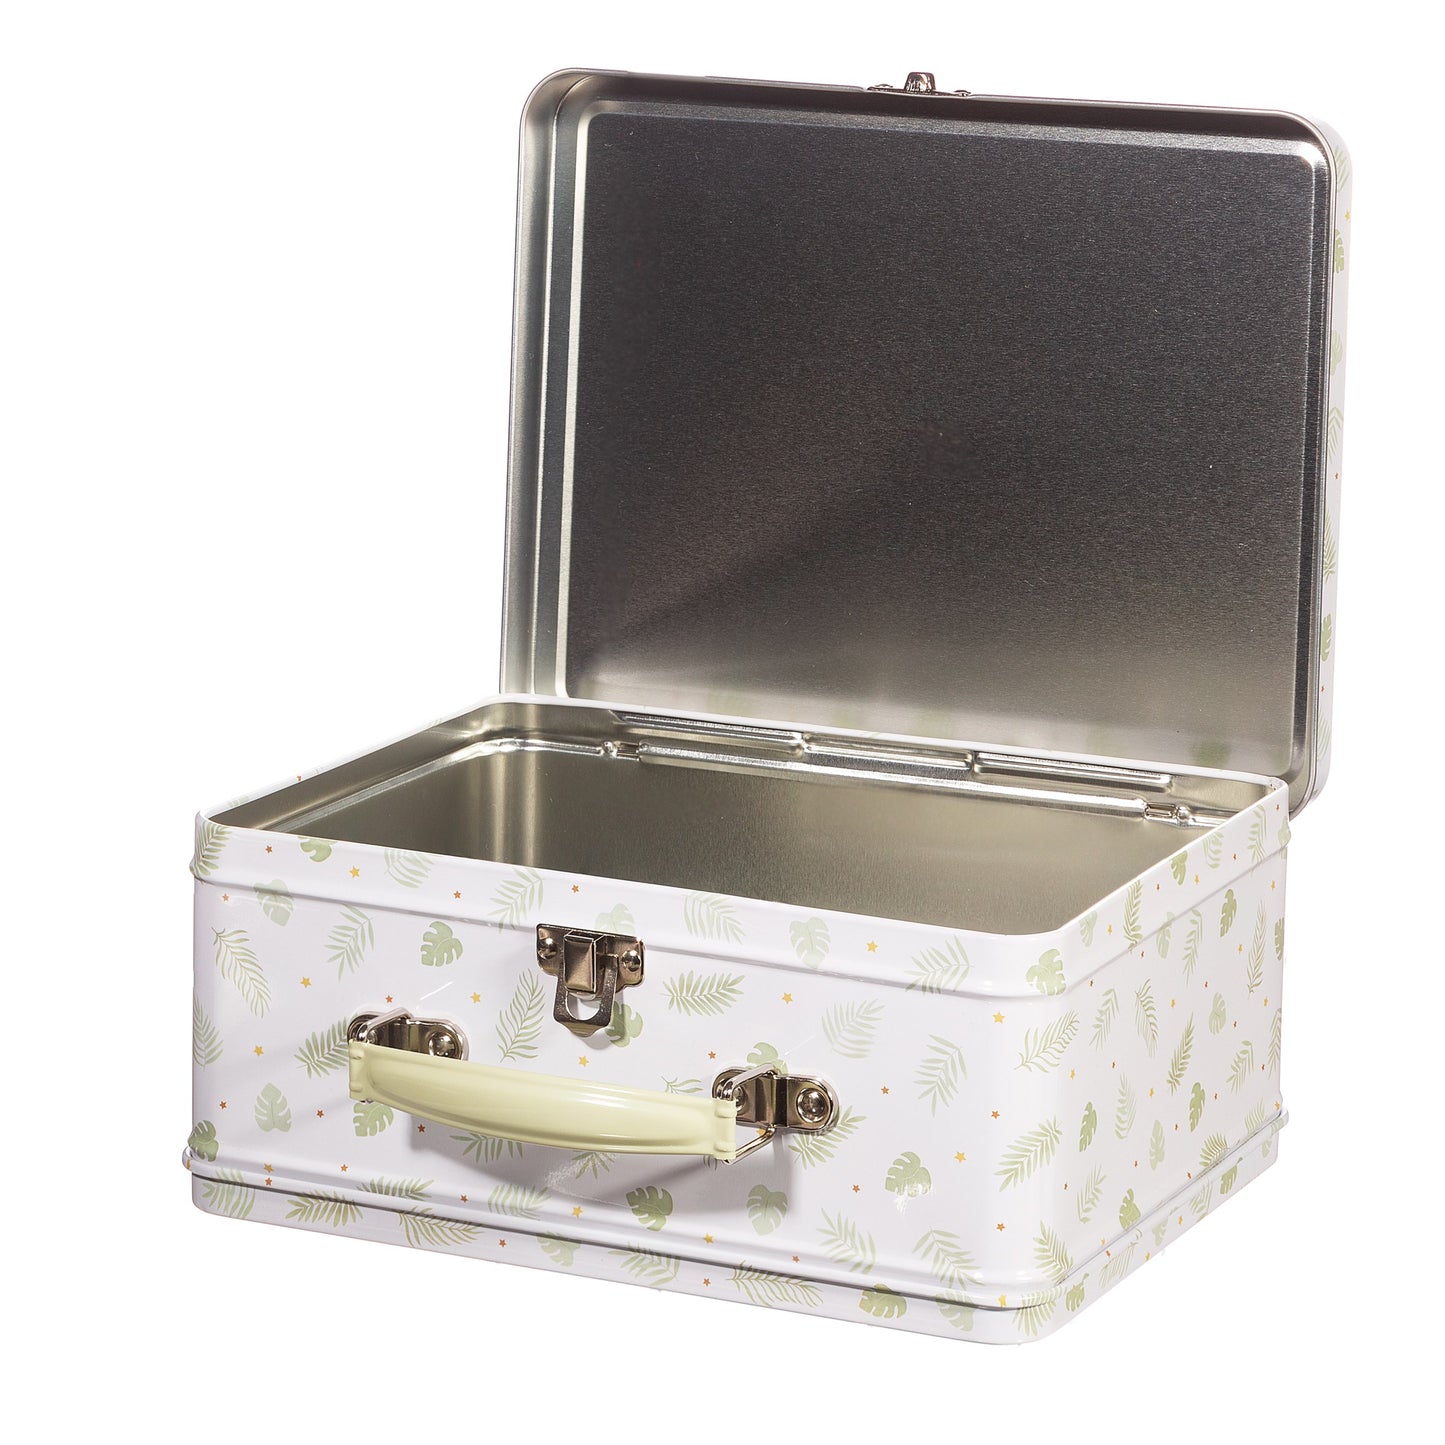 Giraffe Metal Lunch Box by Sass and Belle